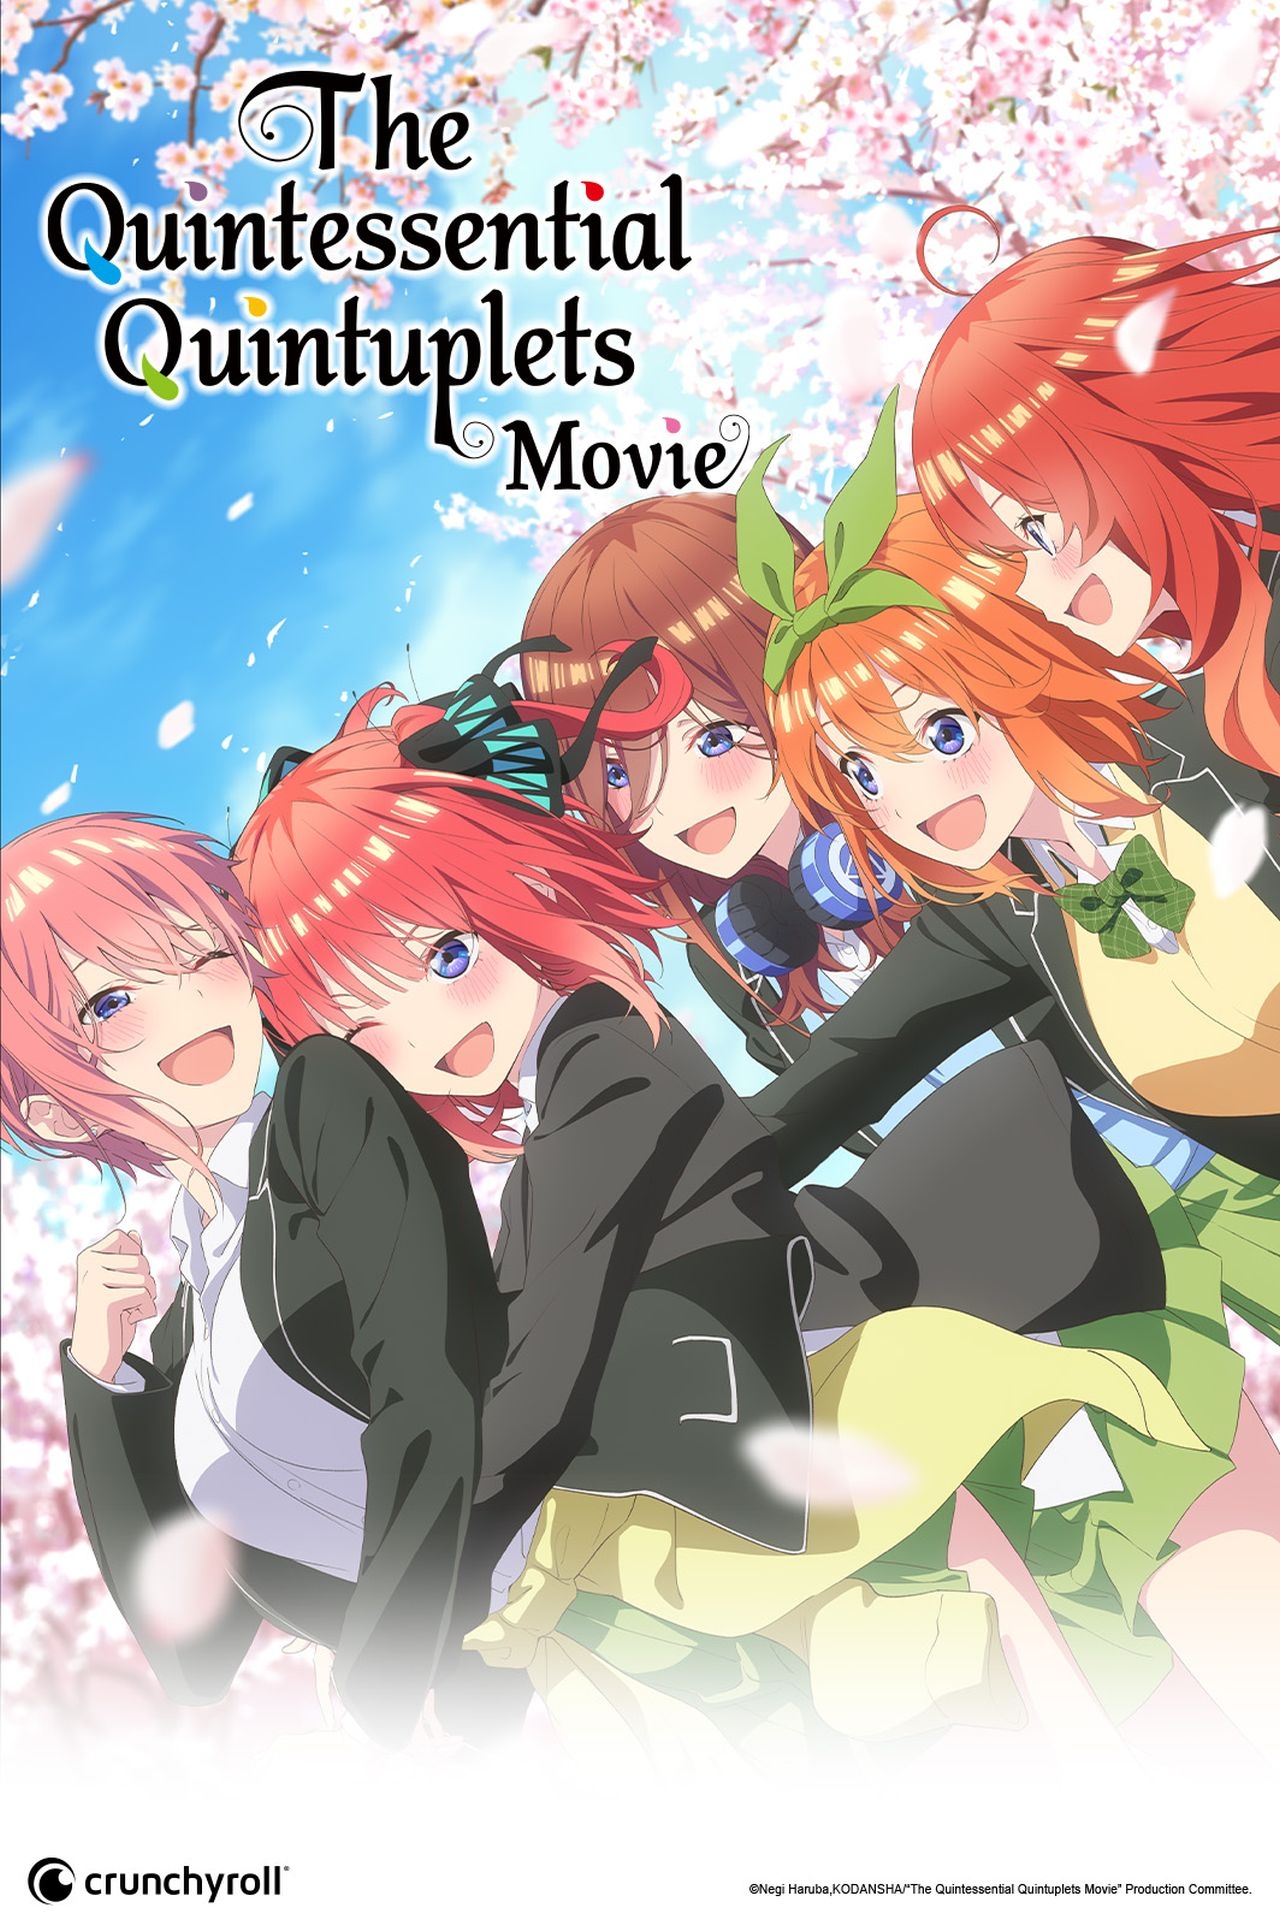 New Movies Arriving on Crunchyroll in April